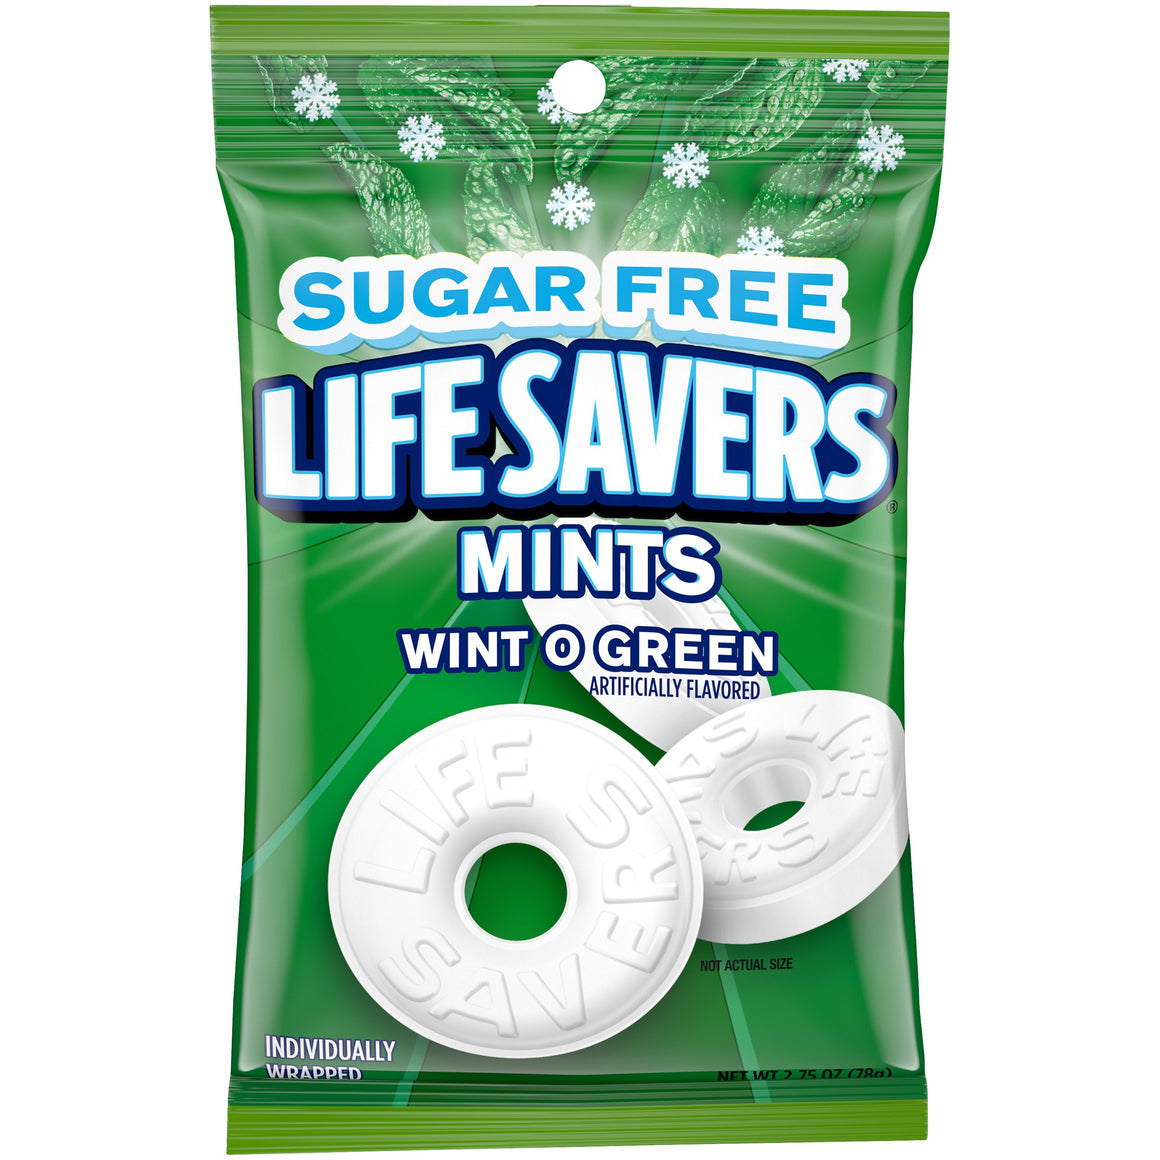 All City Candy Life Savers Sugar Free Mints Wint O Green - 2.75-oz. Bag Hard Wrigley For fresh candy and great service, visit www.allcitycandy.com